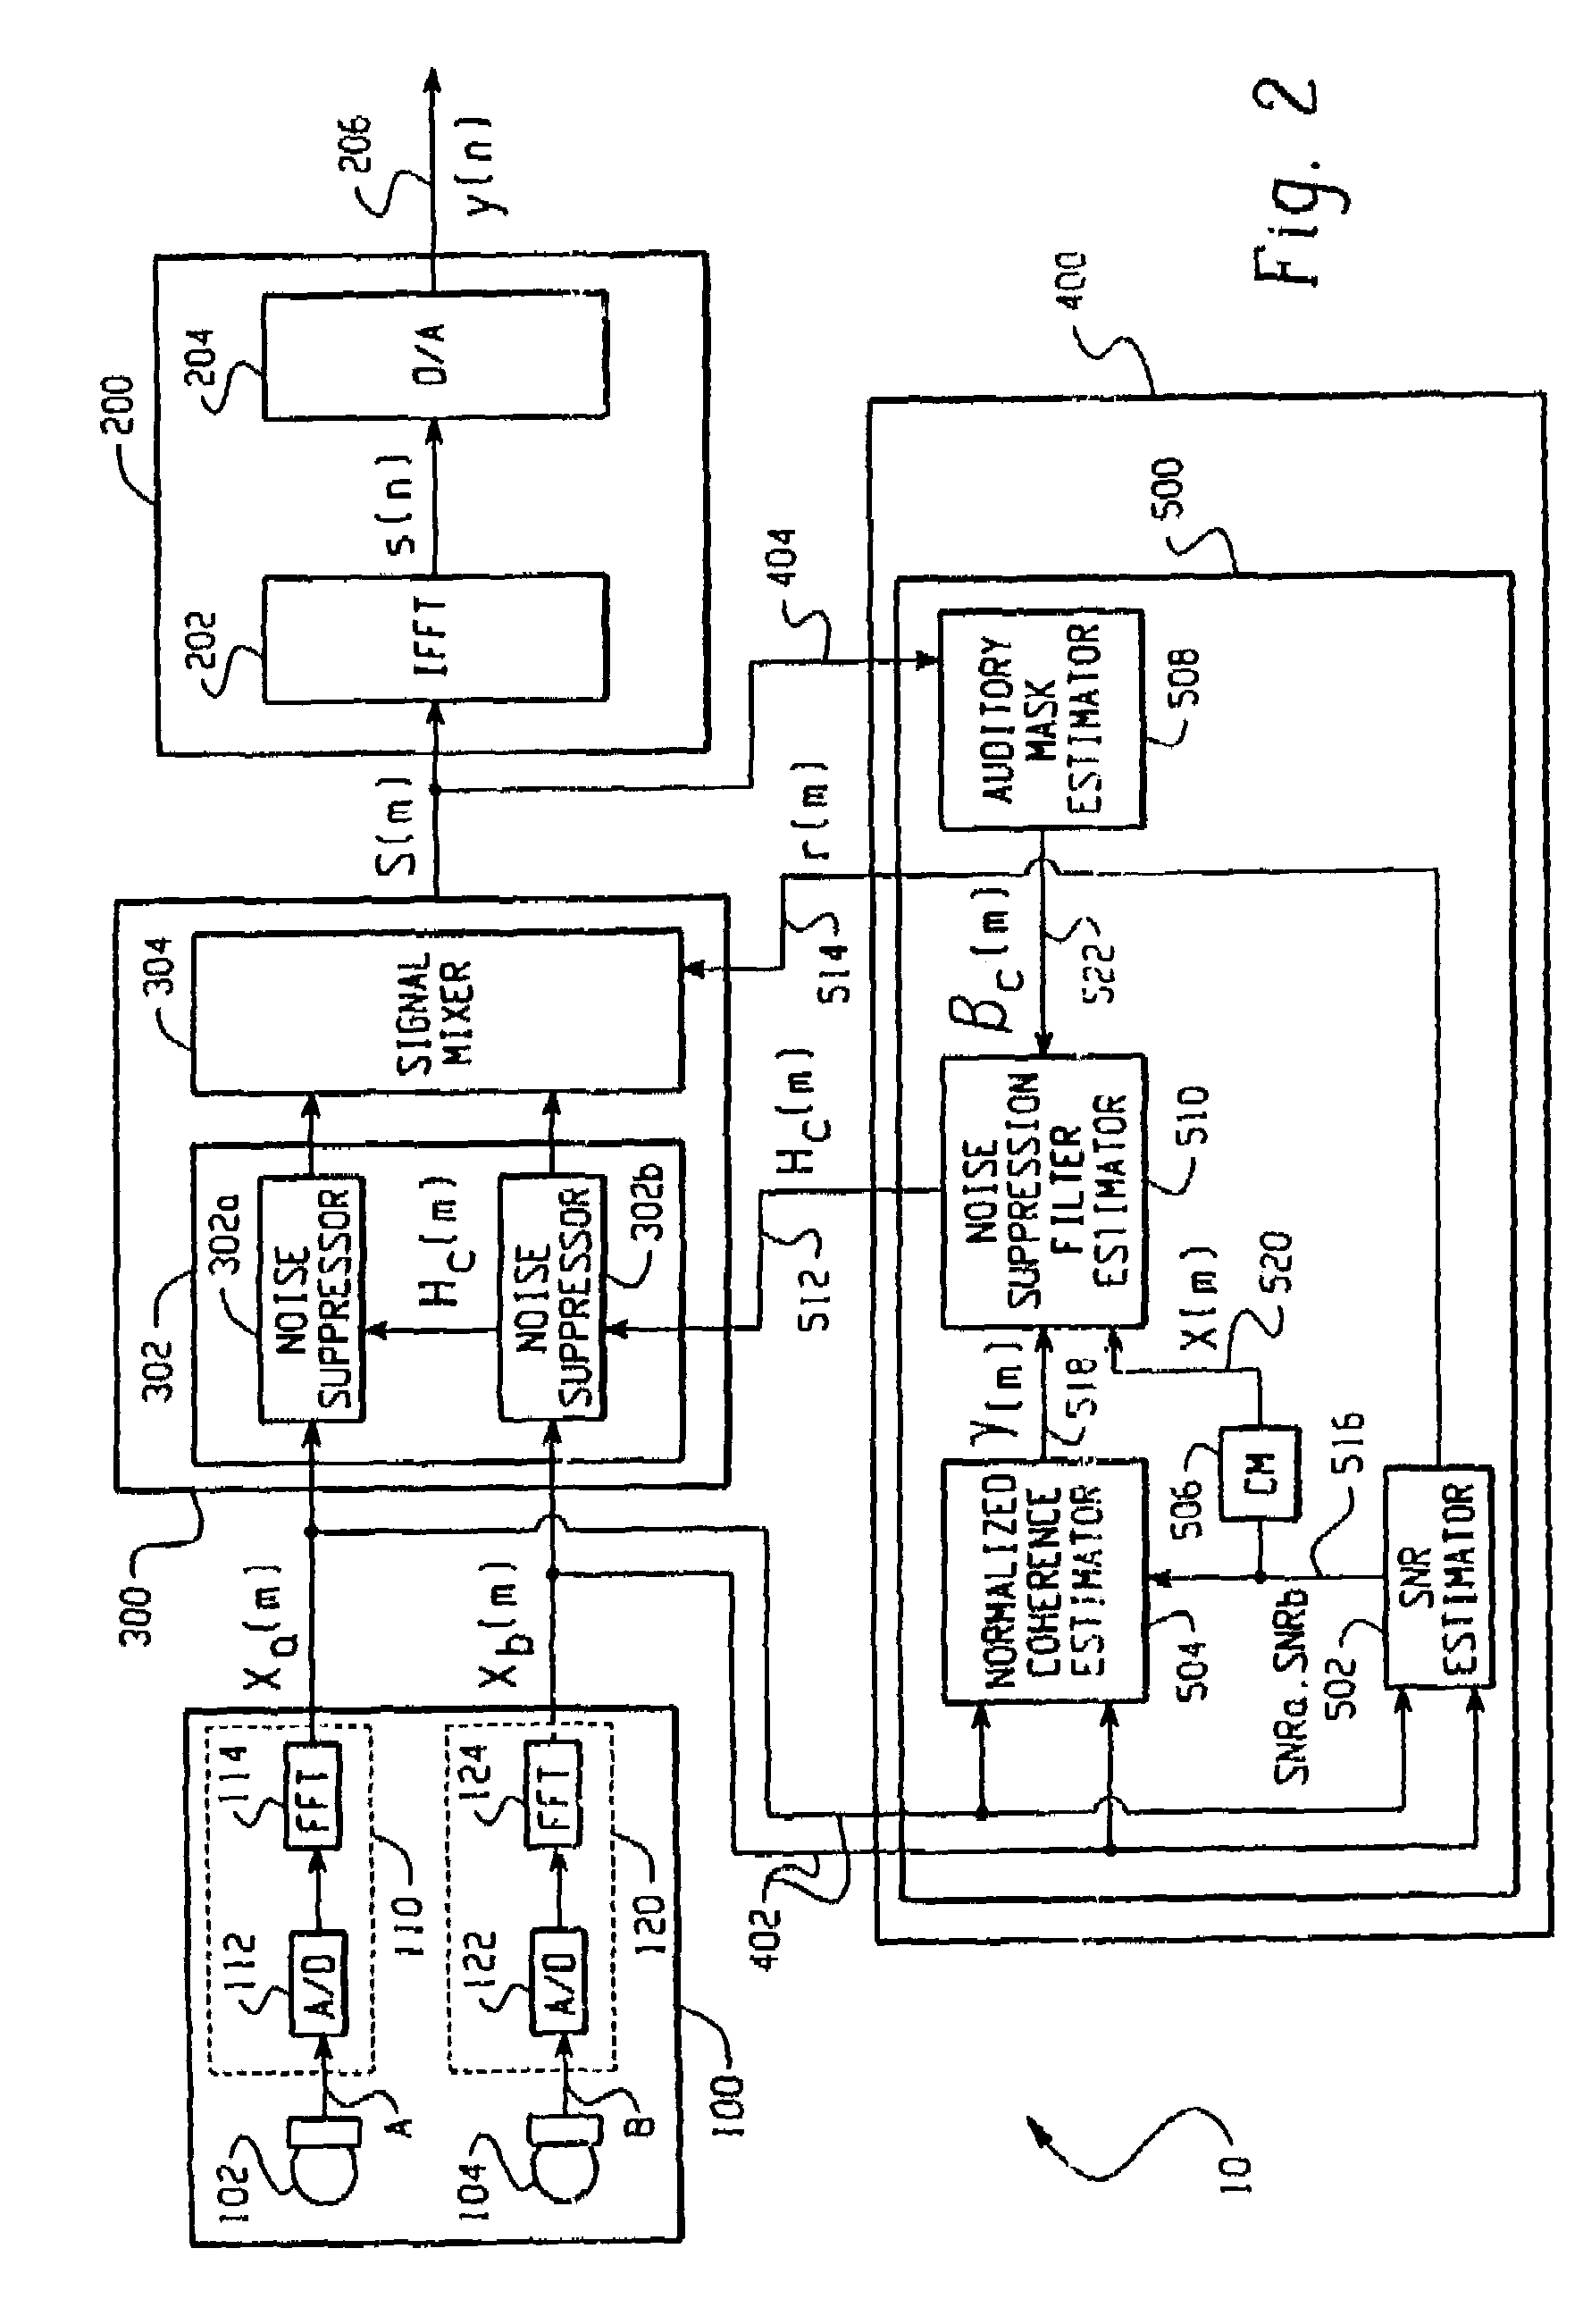 Noise suppression circuit for a wireless device